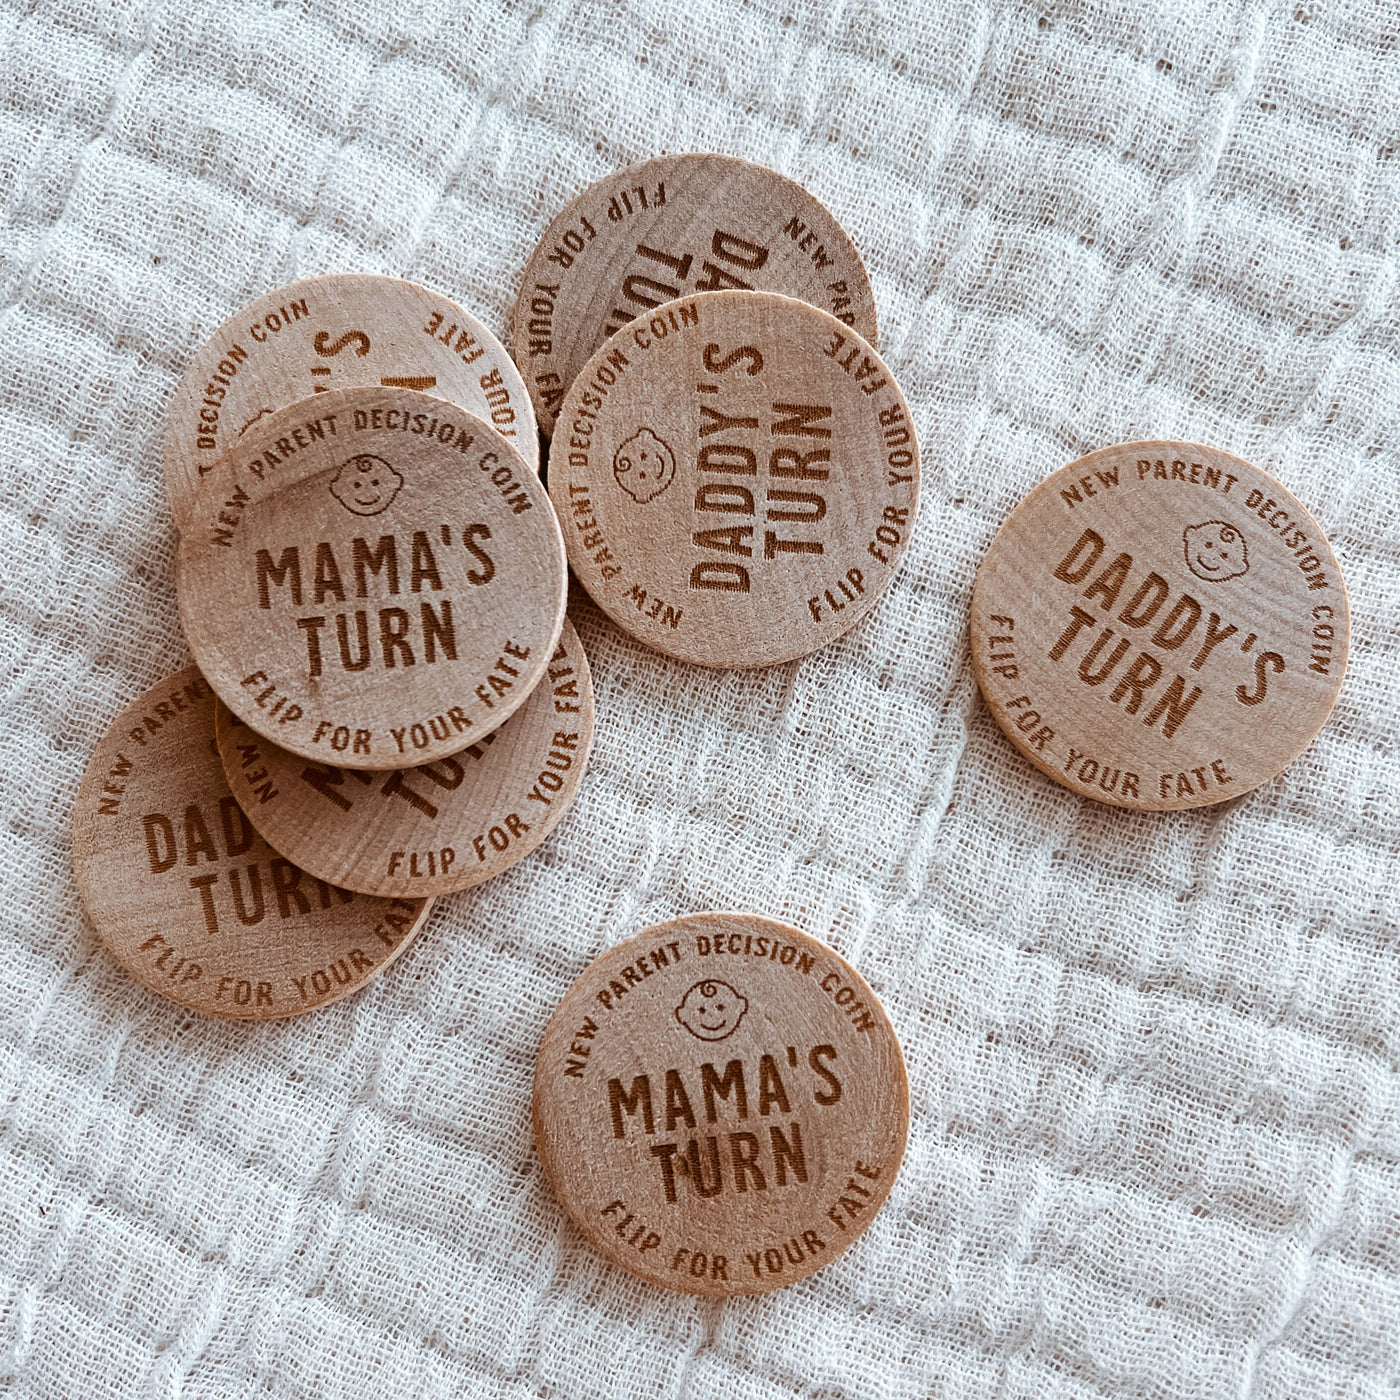 new parent decision coin mommy or daddy's turn